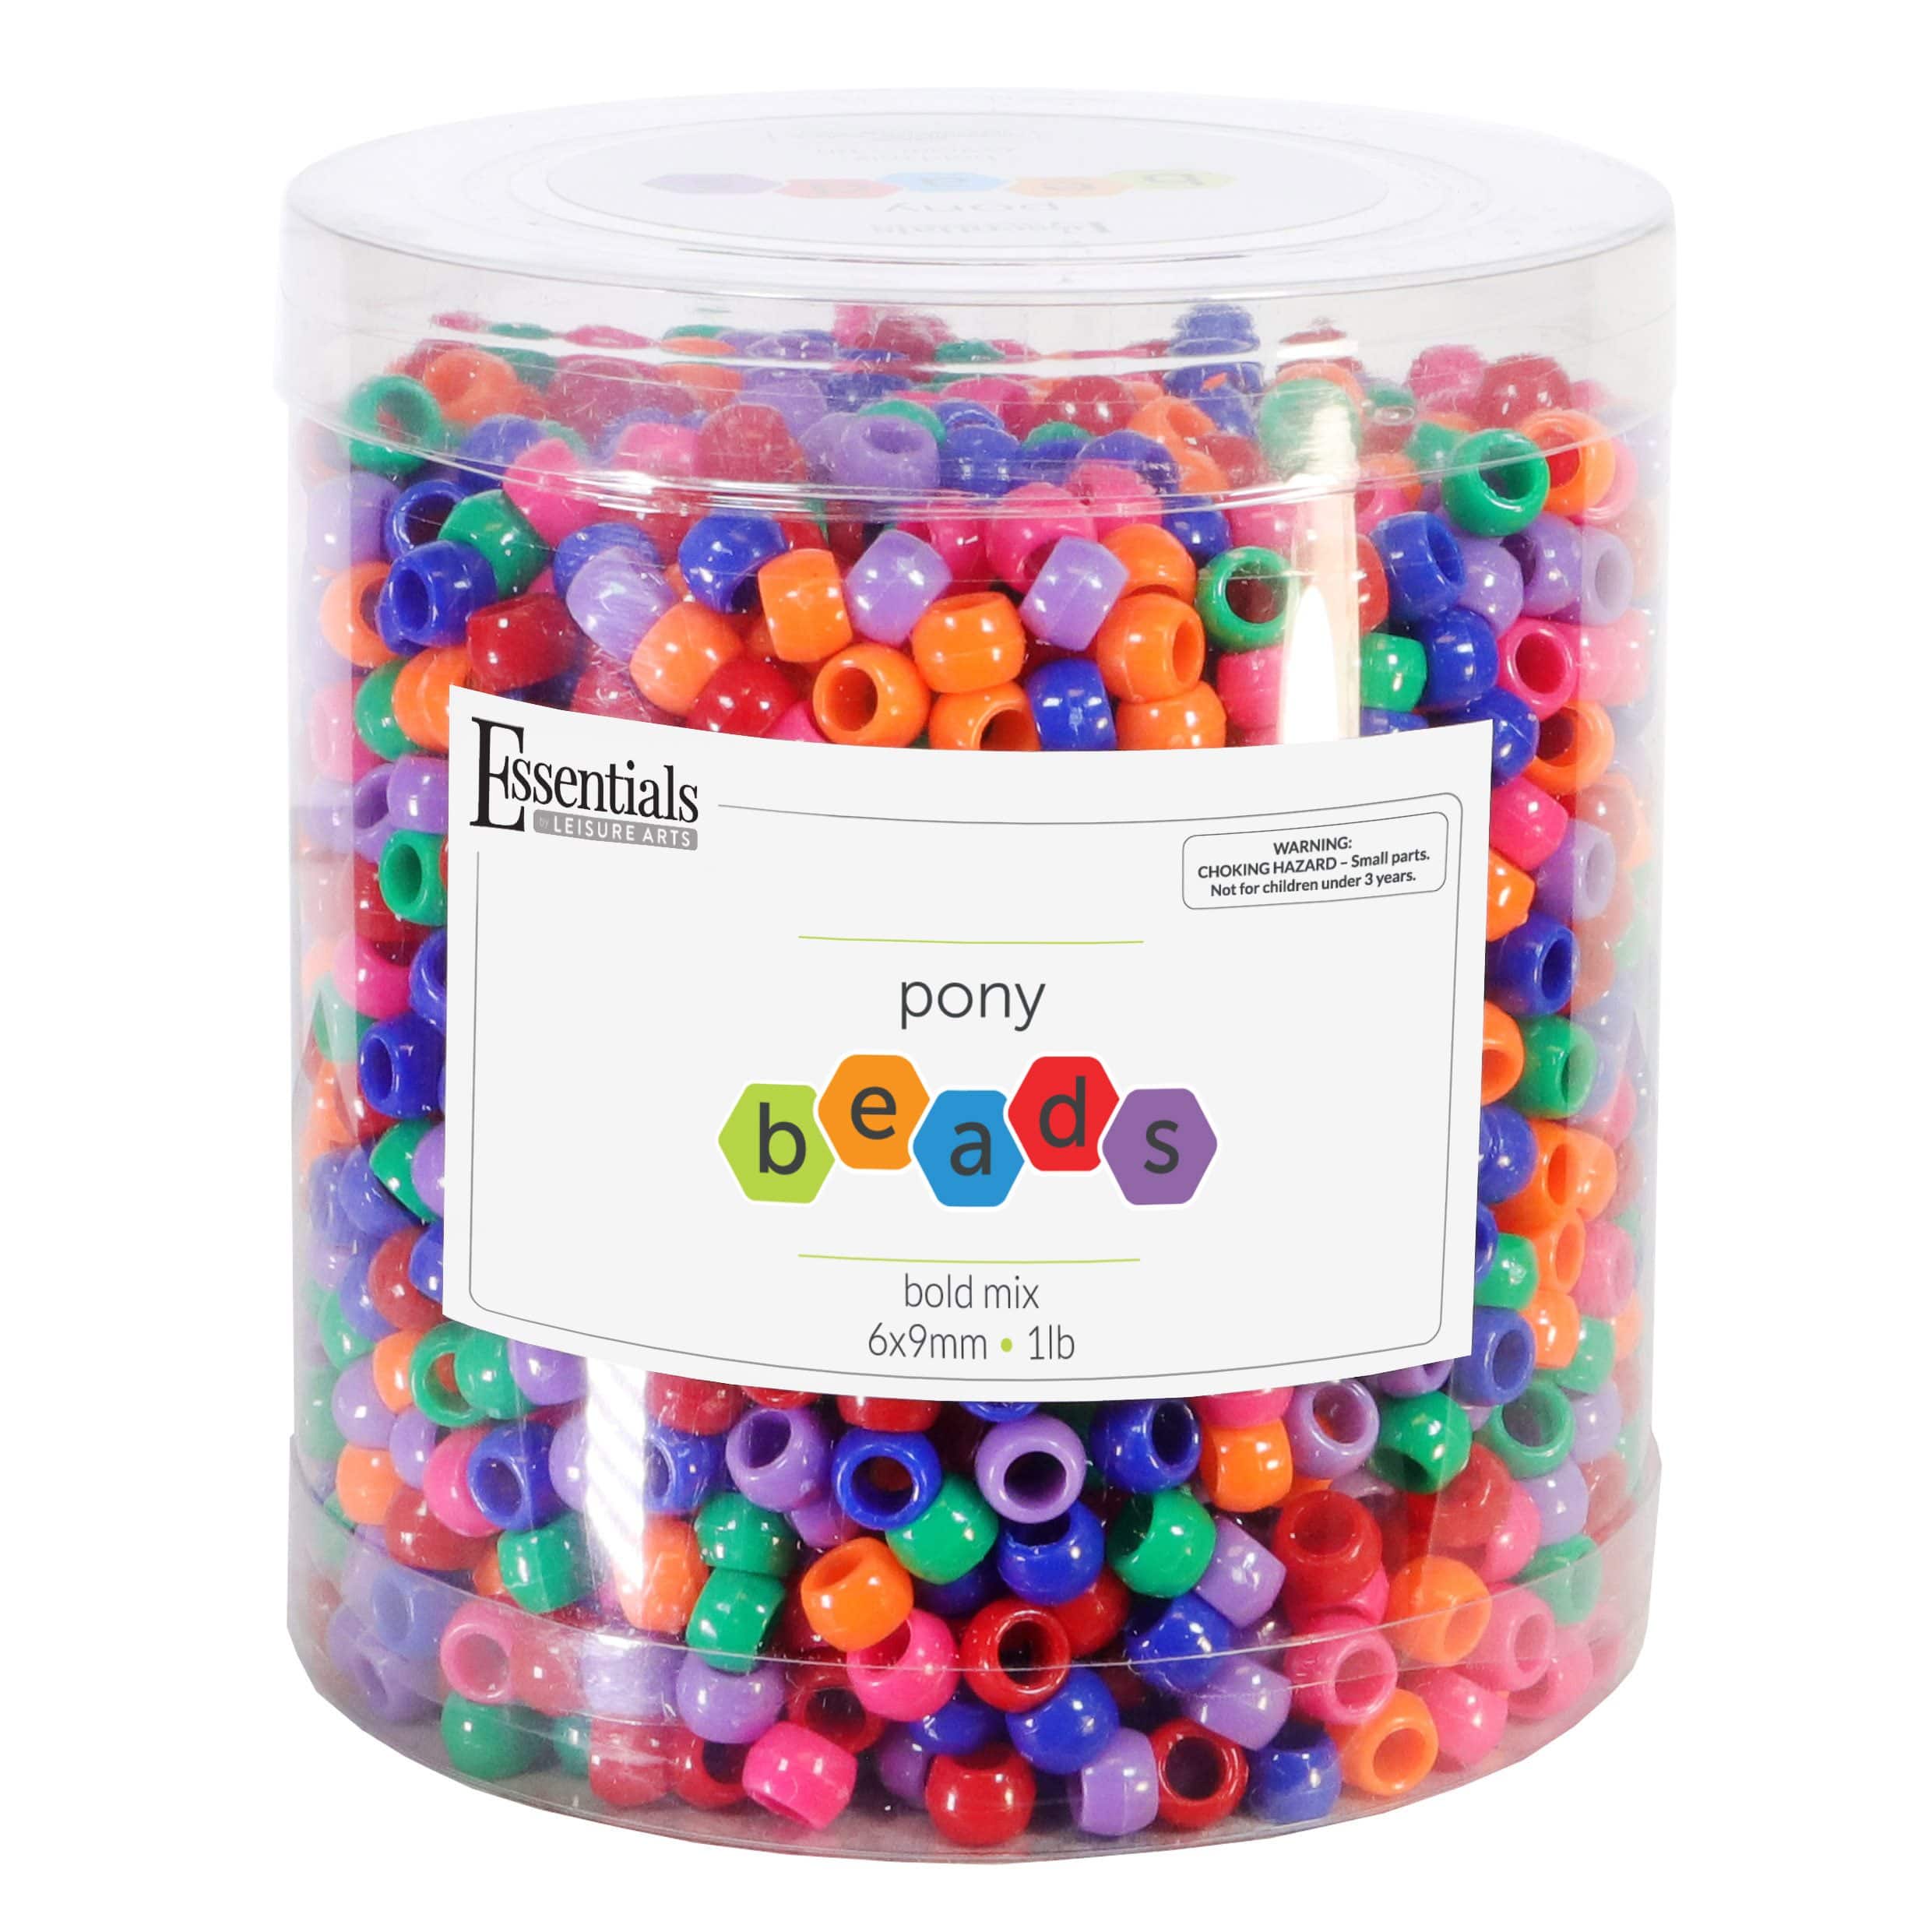 Essentials by Leisure Arts Bold Mix Pony Beads, 1lb.